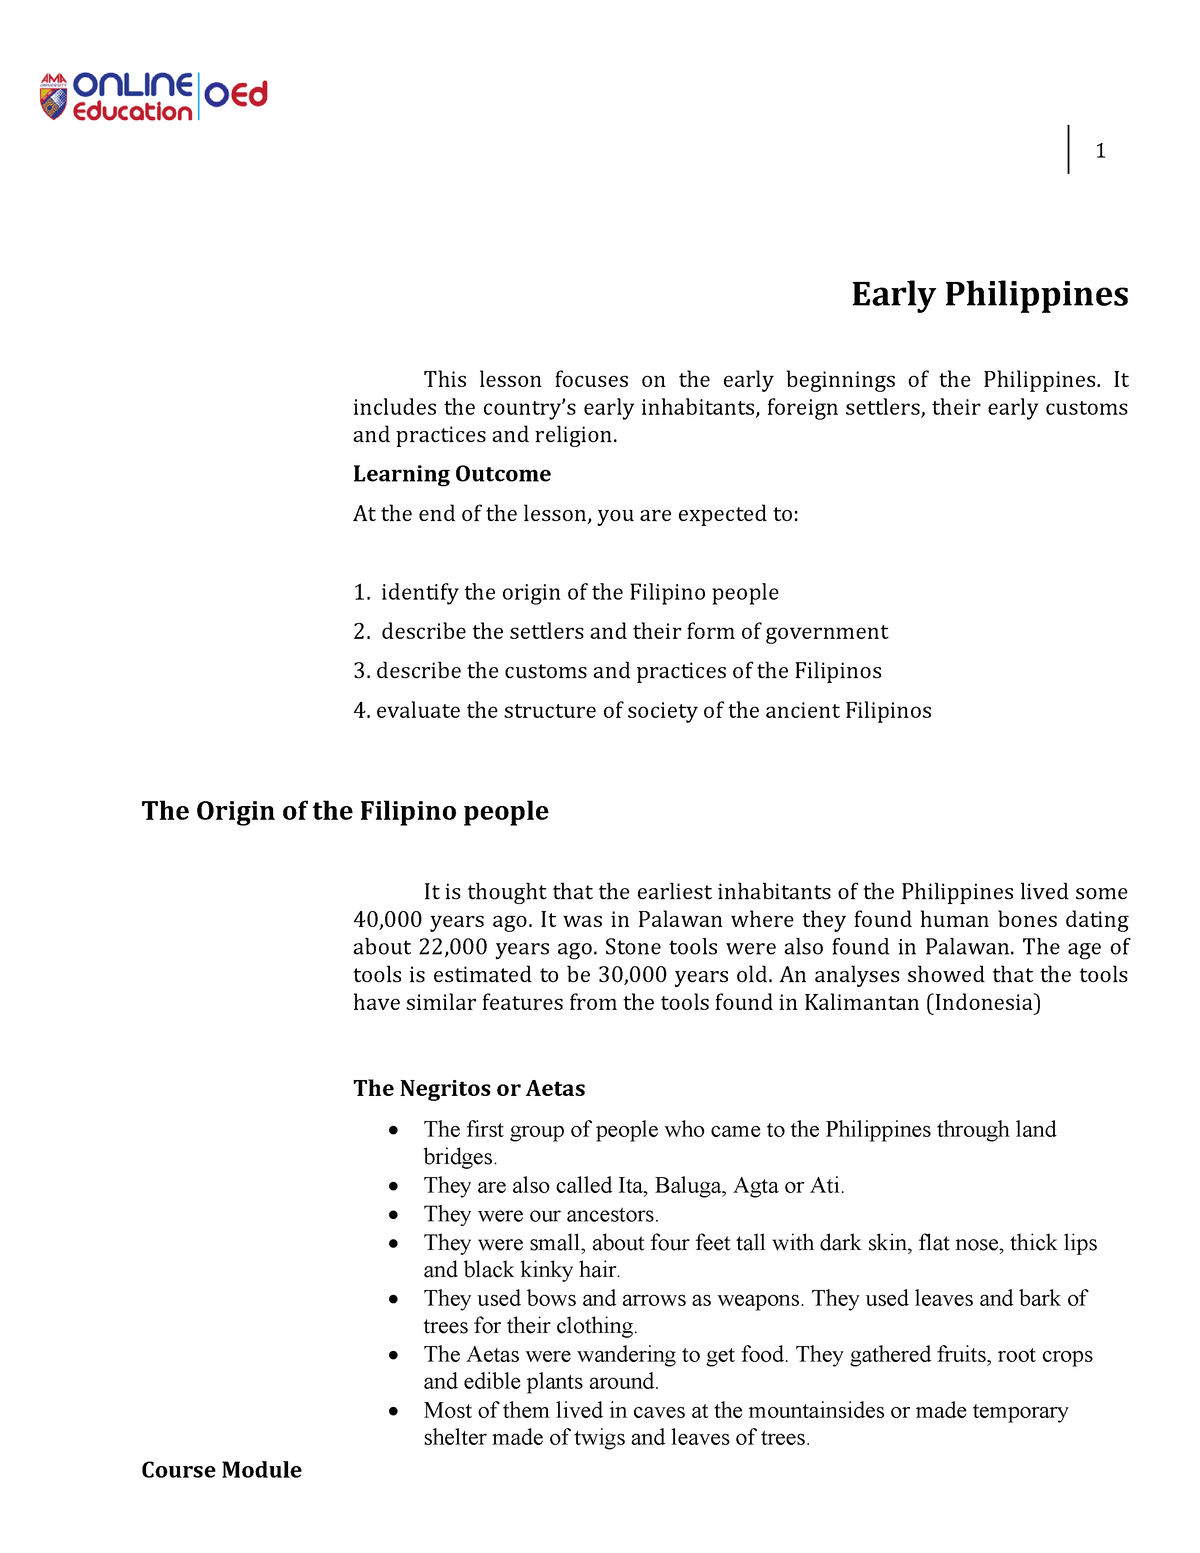 local studies about homework in the philippines pdf